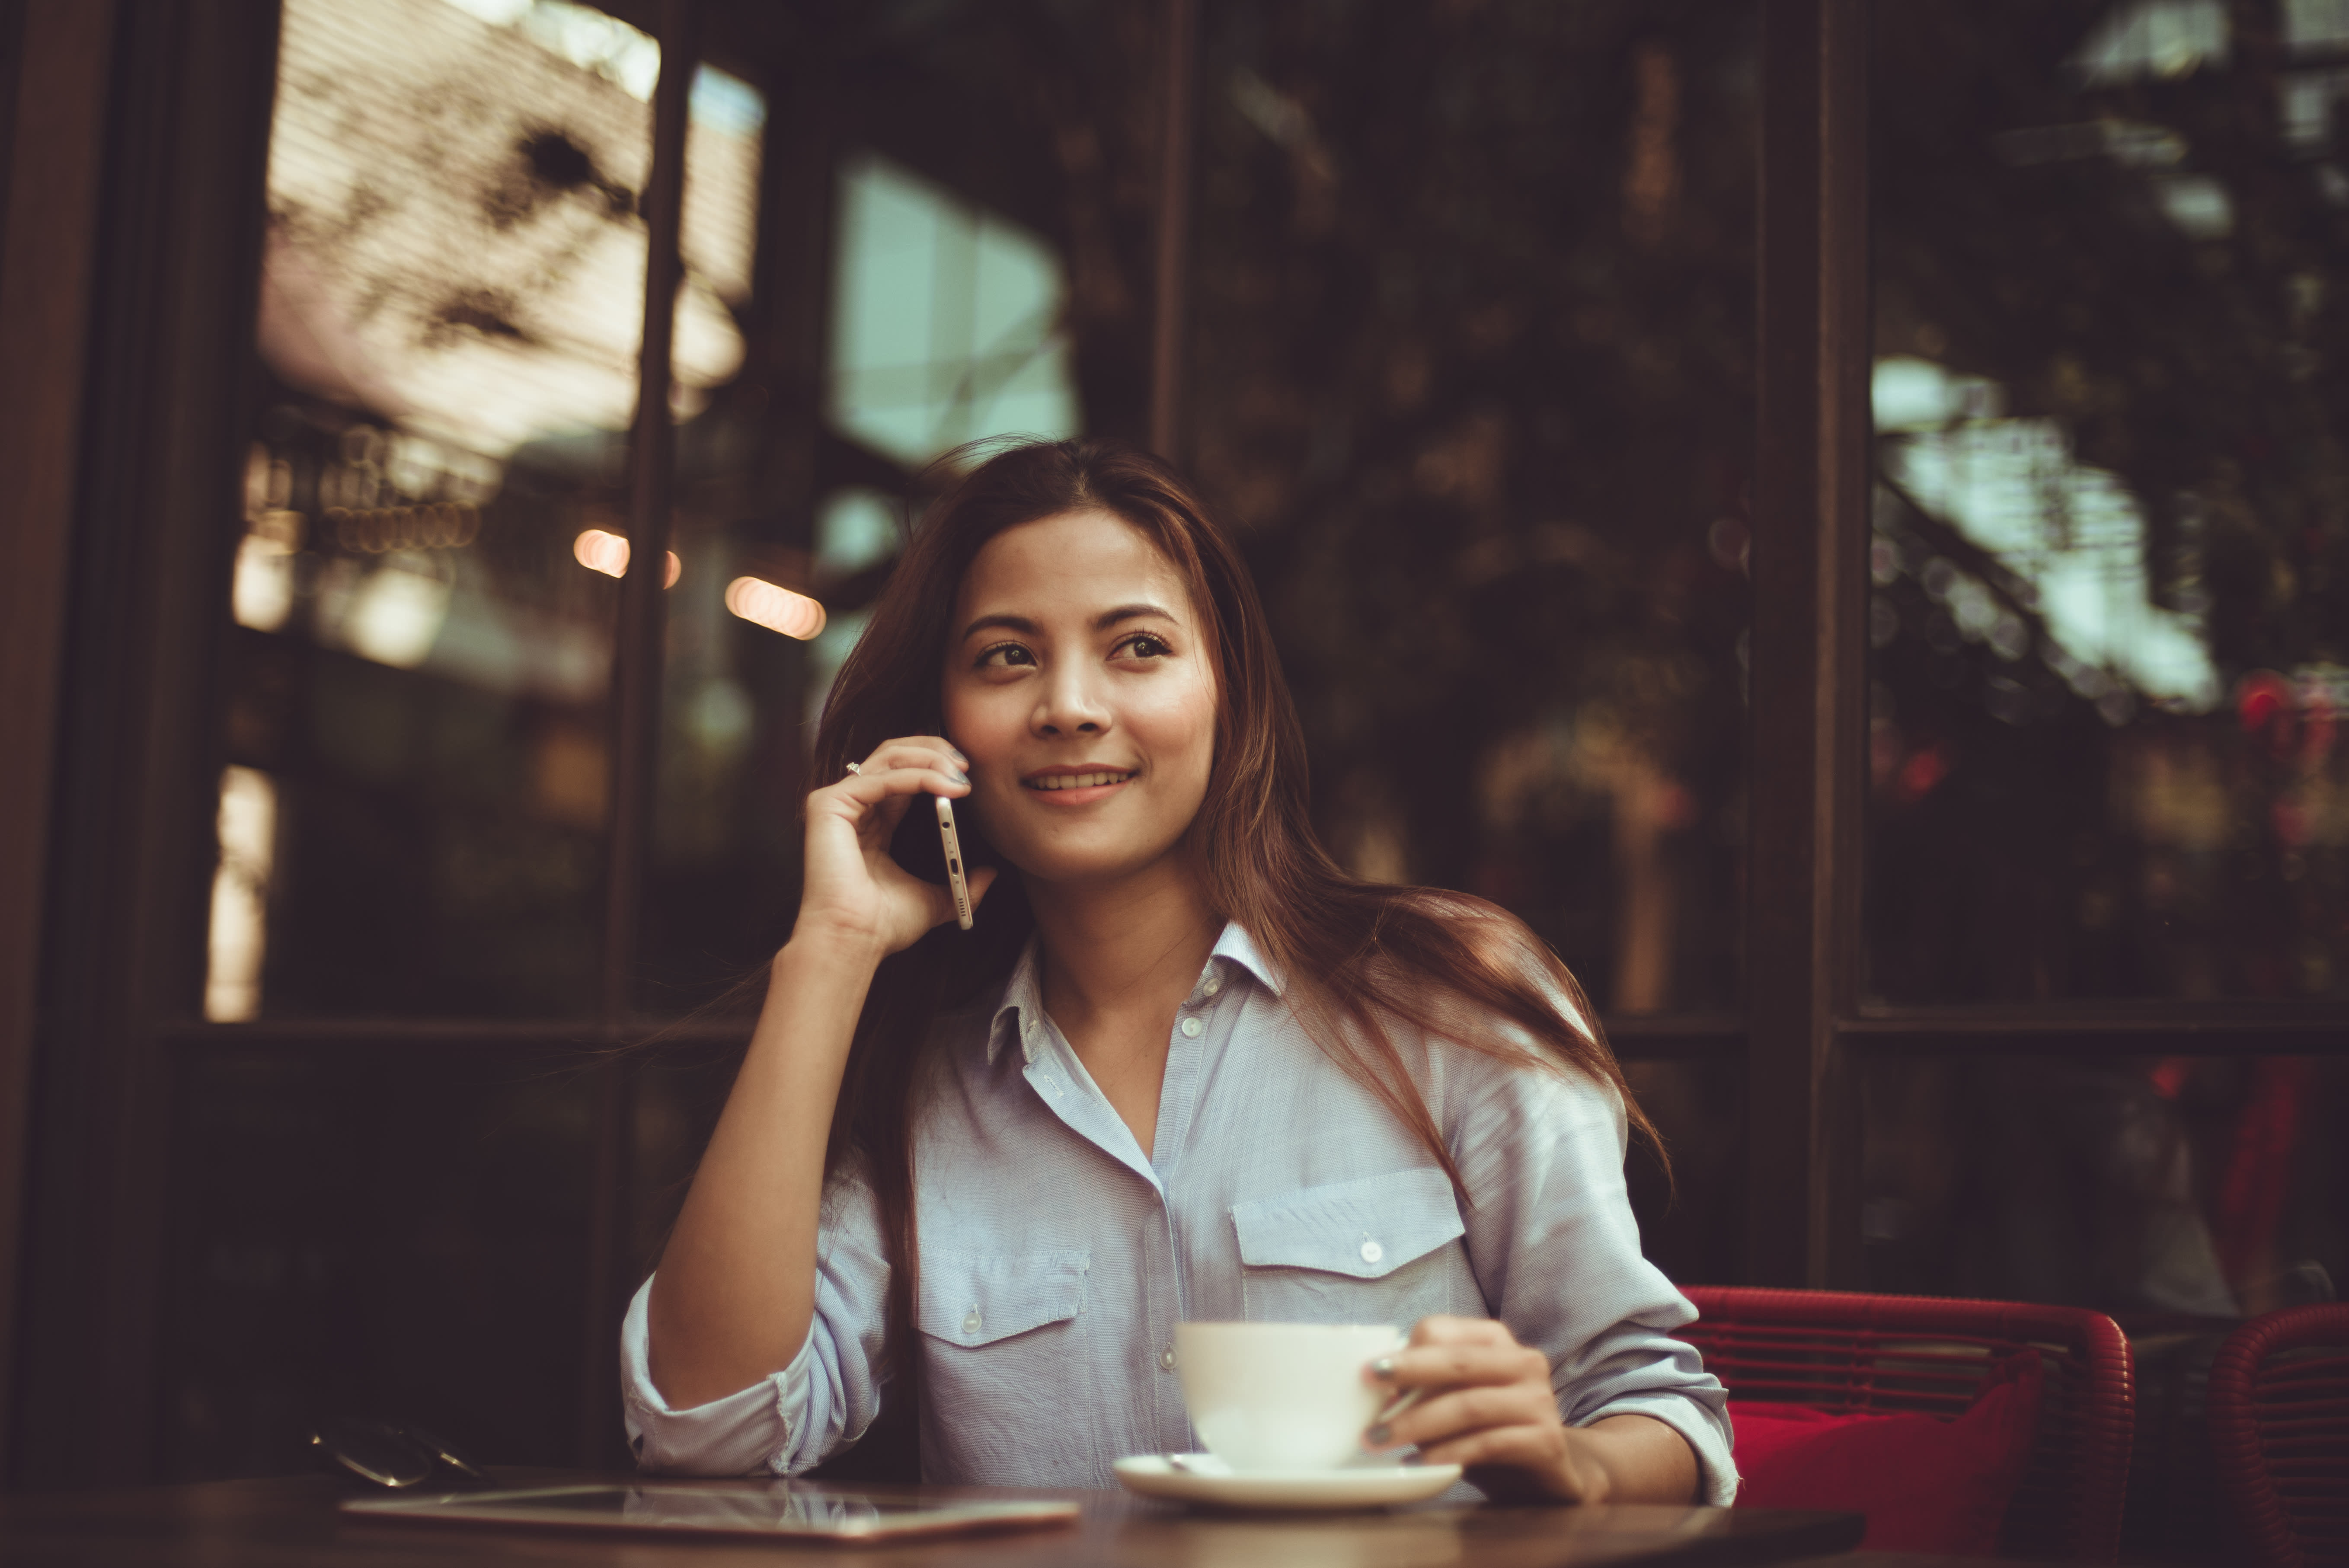 Image of a woman sitting down having a cup of coffee while talking on the phone.